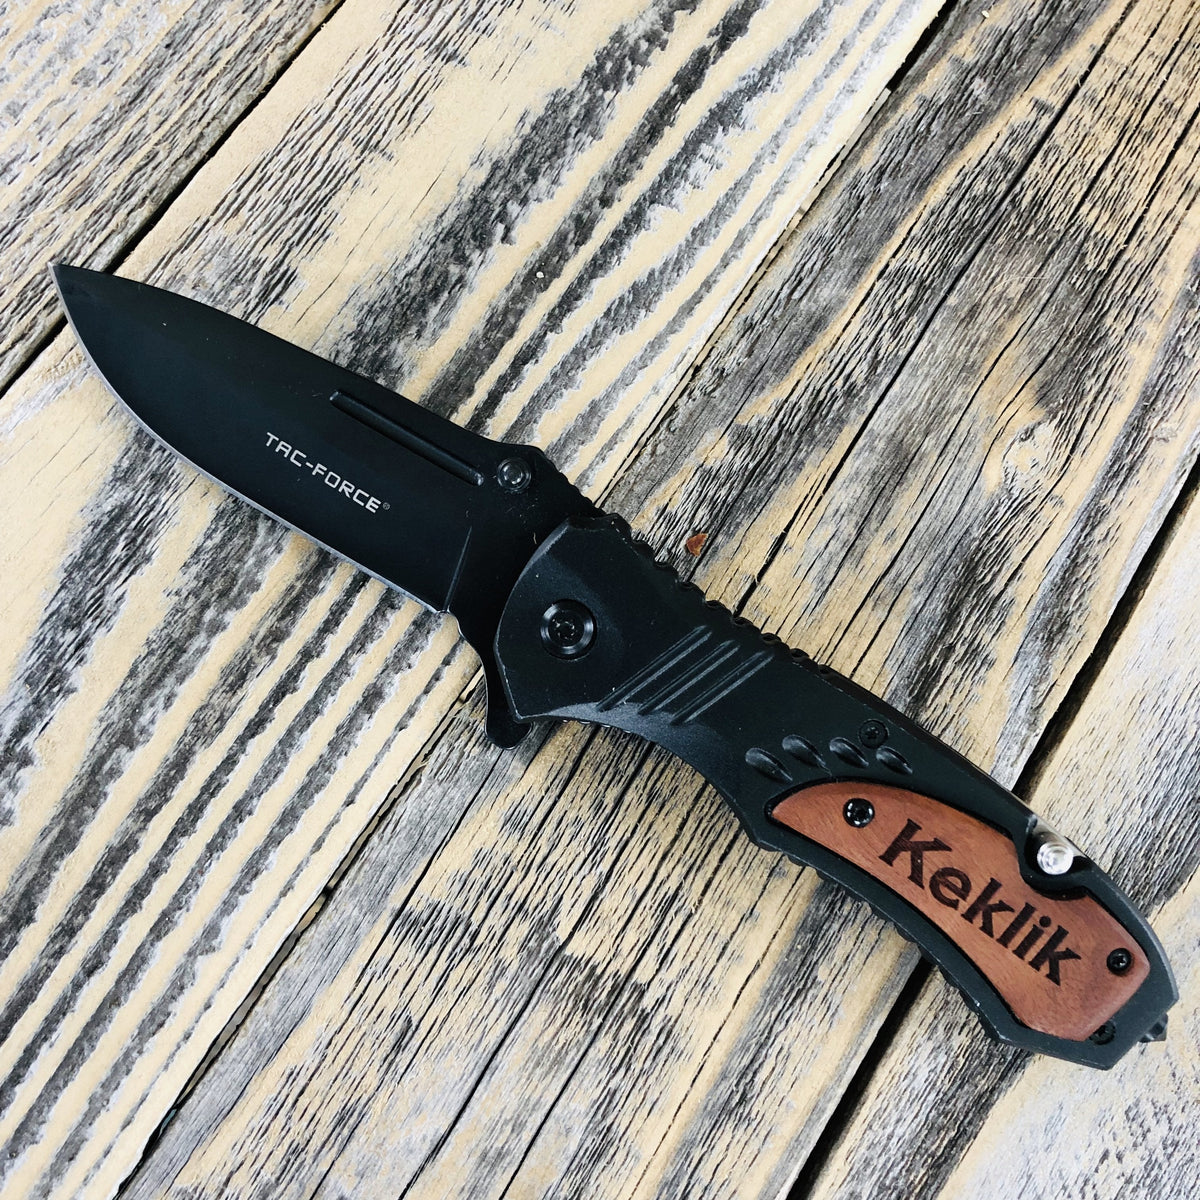 Knives - GroomsDay